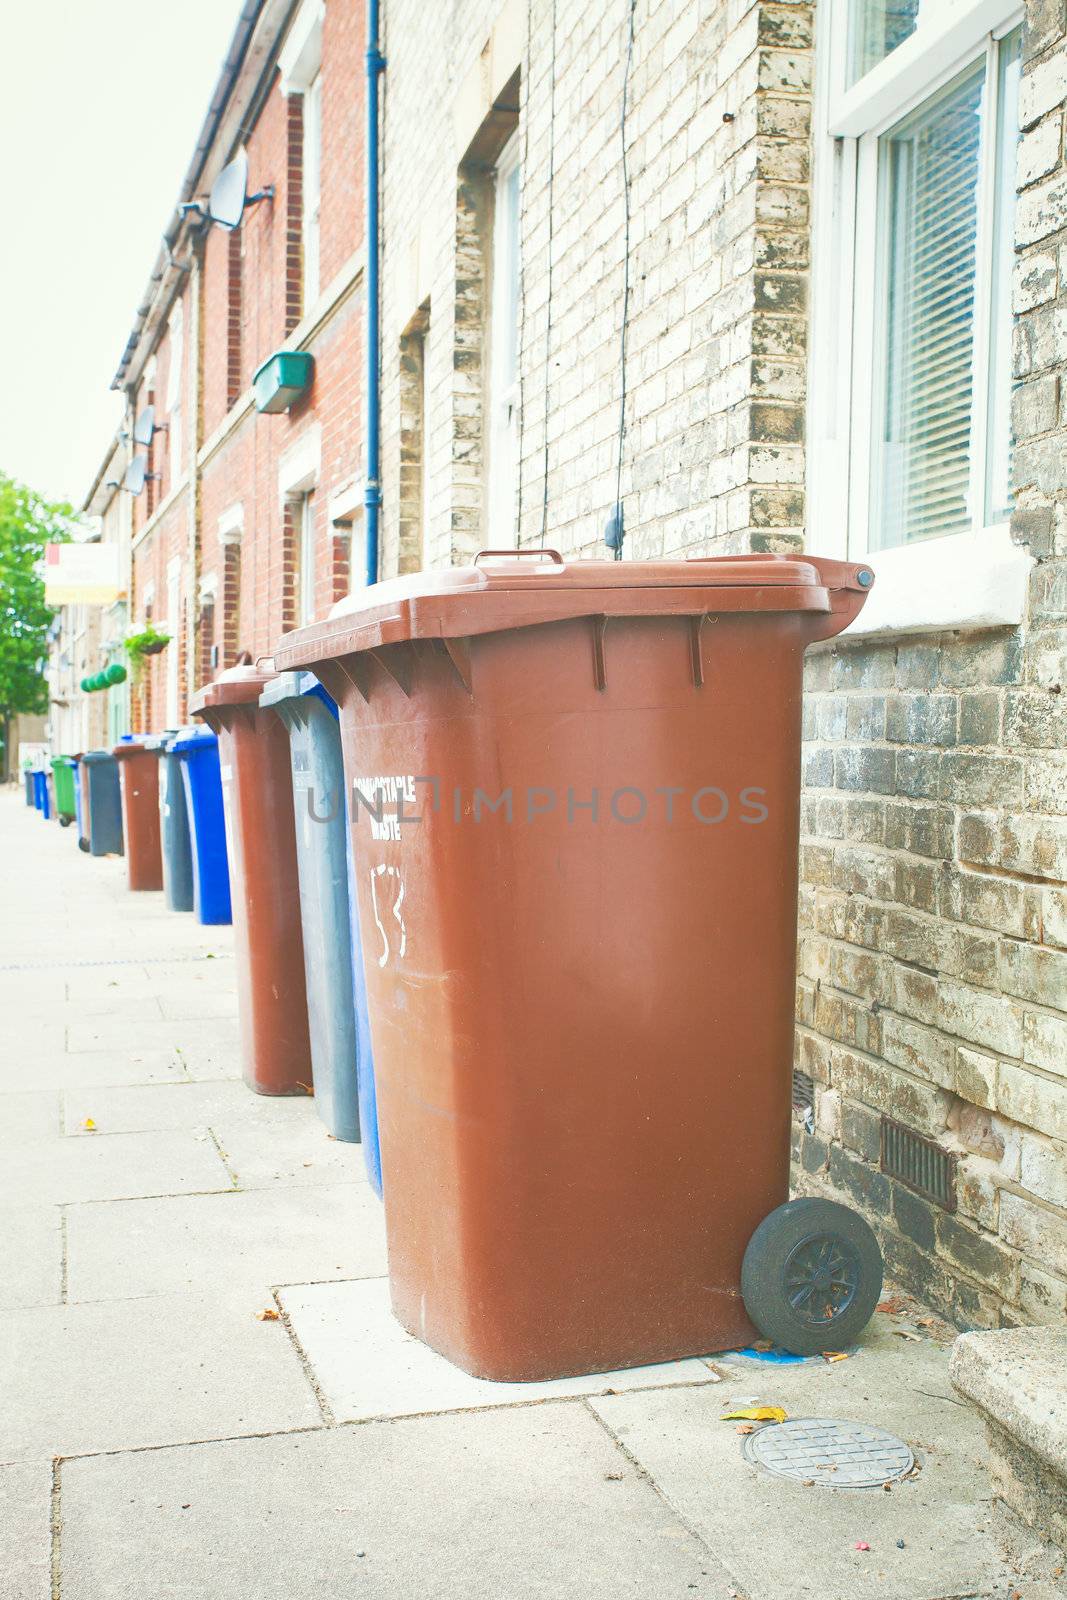 Row of plastic bins for collection in England